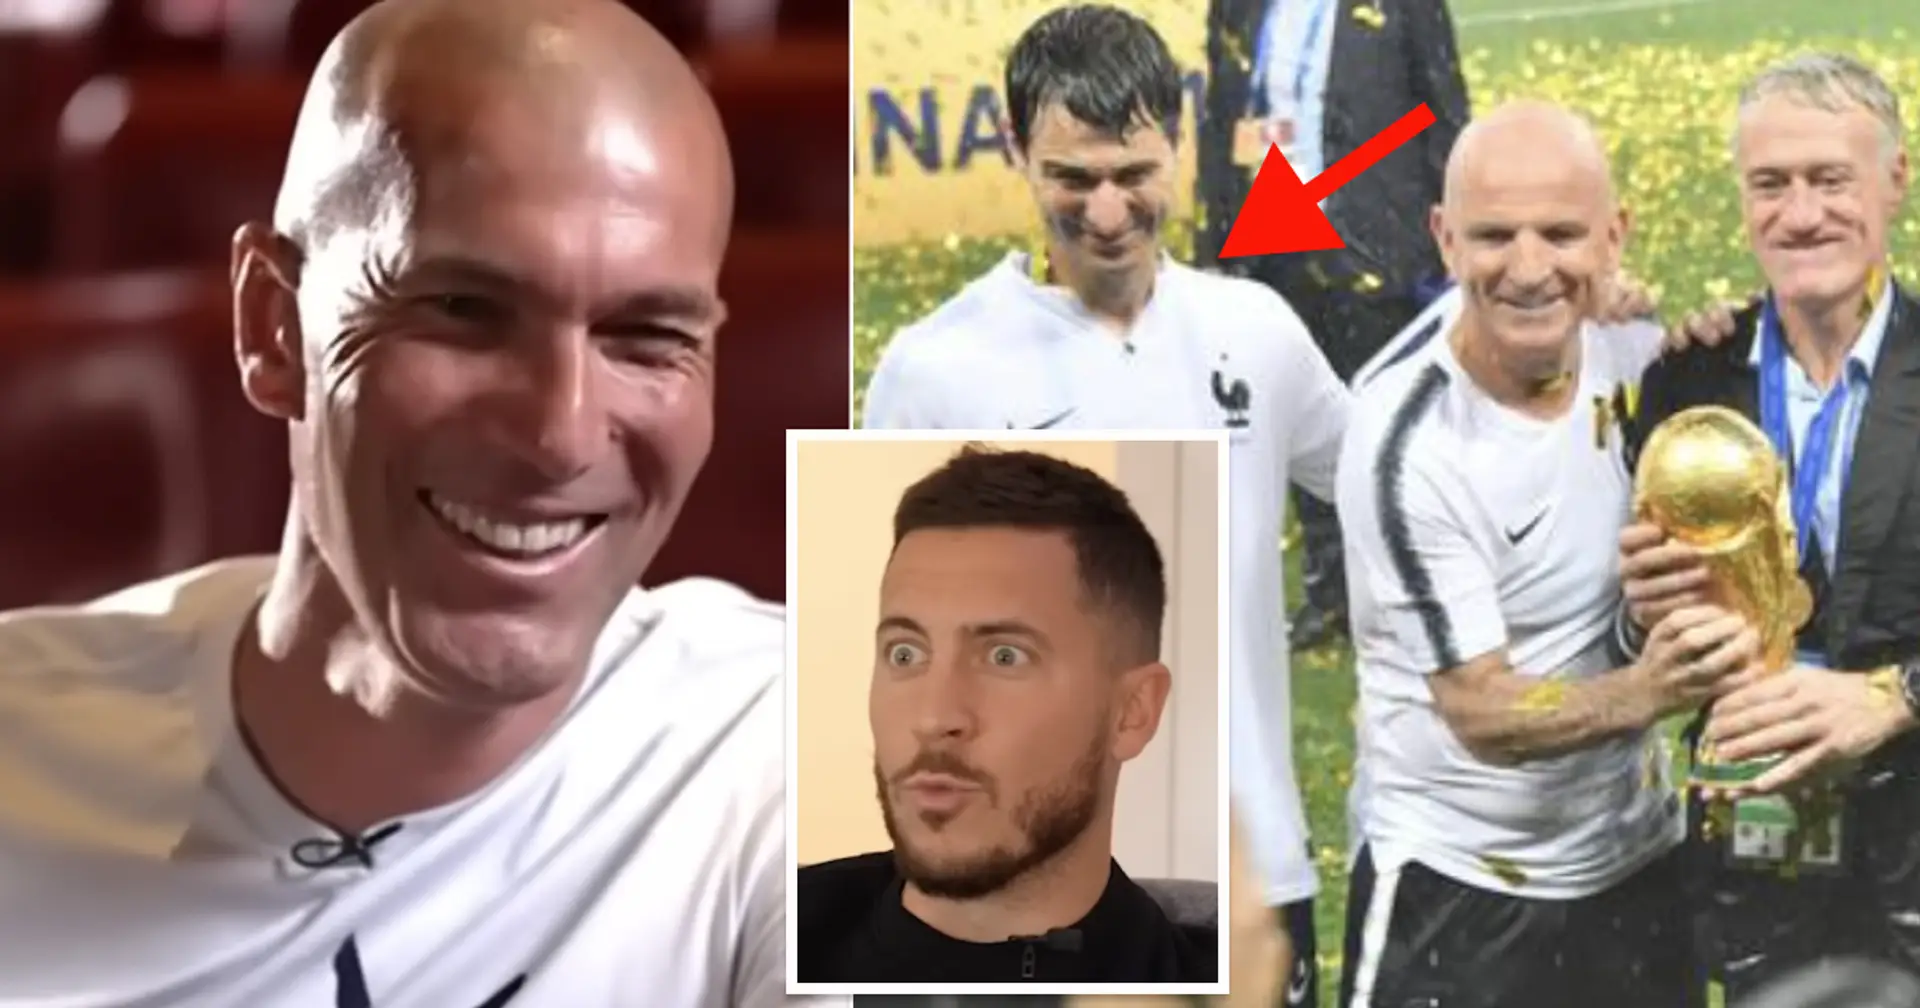 Two conditions for Zidane to accept Madrid job named -- one has to do with Hazard (reliability: 3 stars)